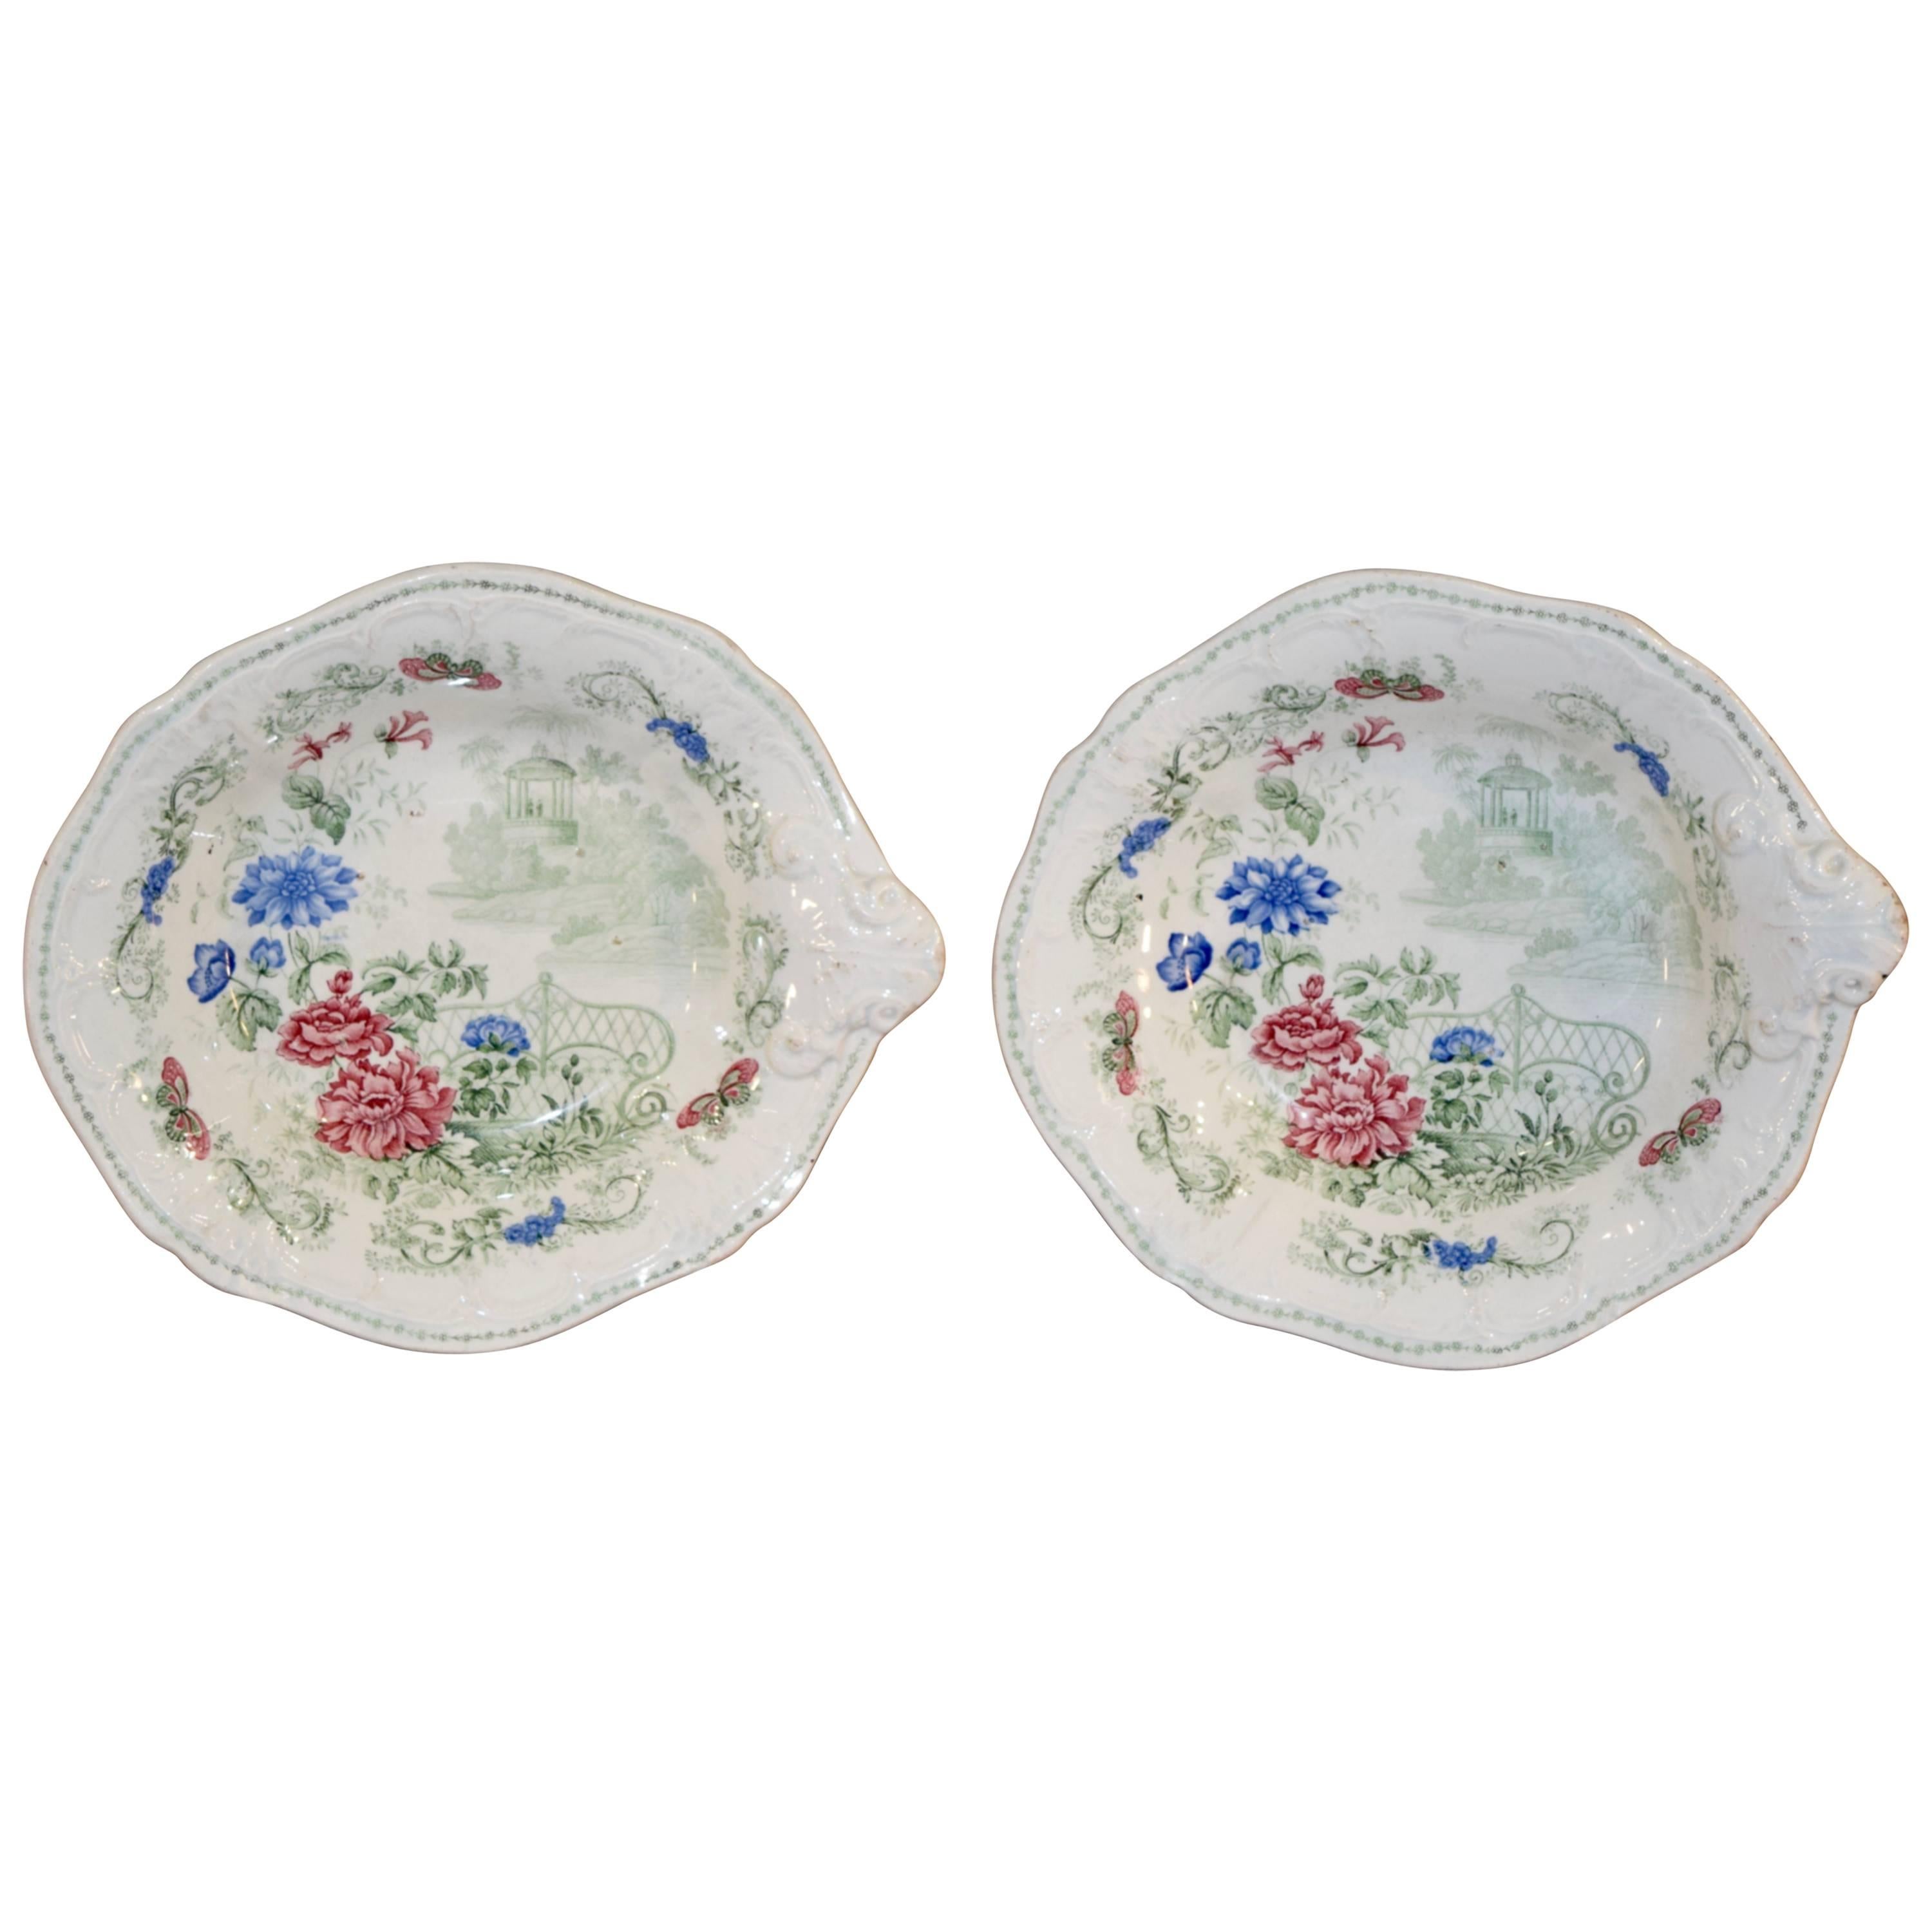 19th Century Pair of Shaped Dishes